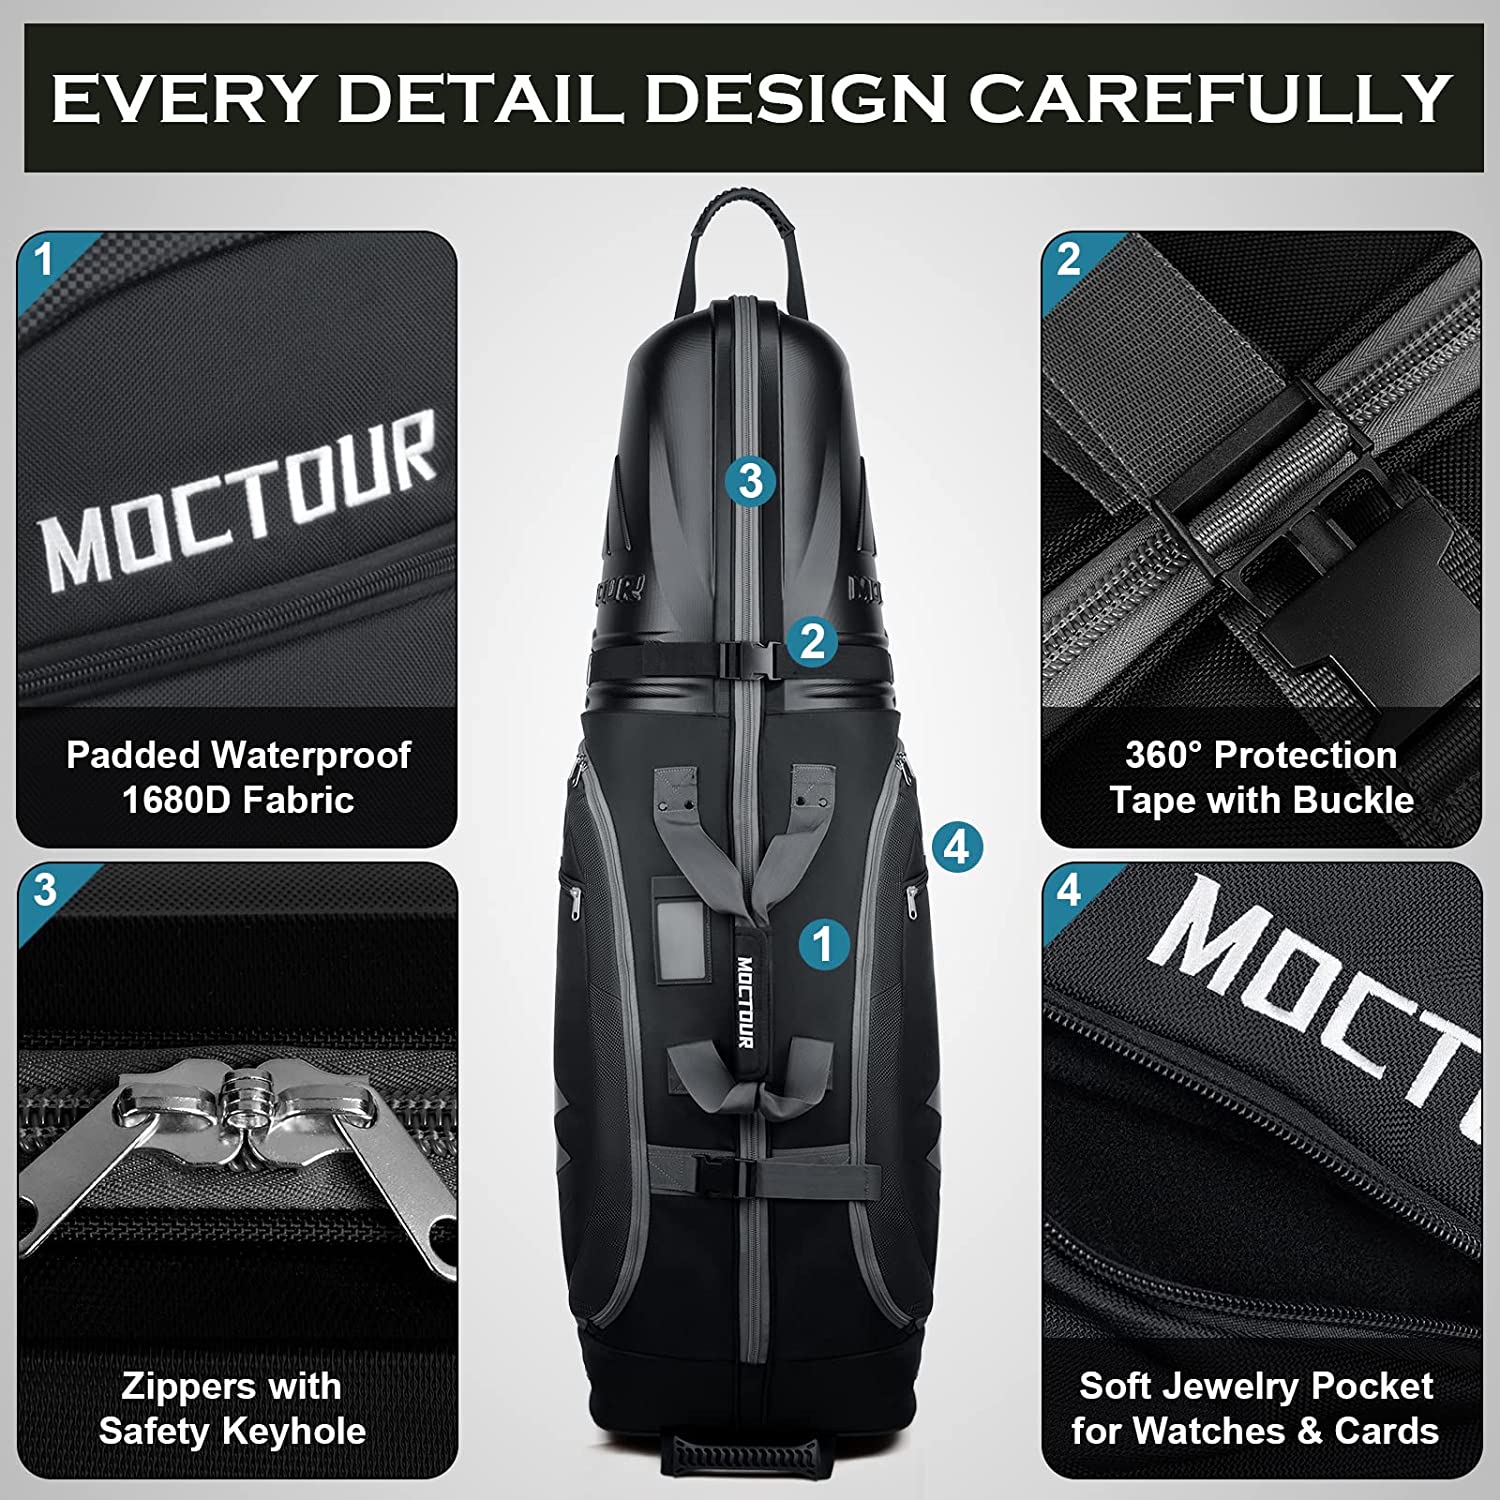 MOCTOUR Golf Travel Bags for Airlines with Wheels & ABS Hard Case Top, Lightweight, Waterproof 1680D Oxford Fabric & Oversize Tank Wheels